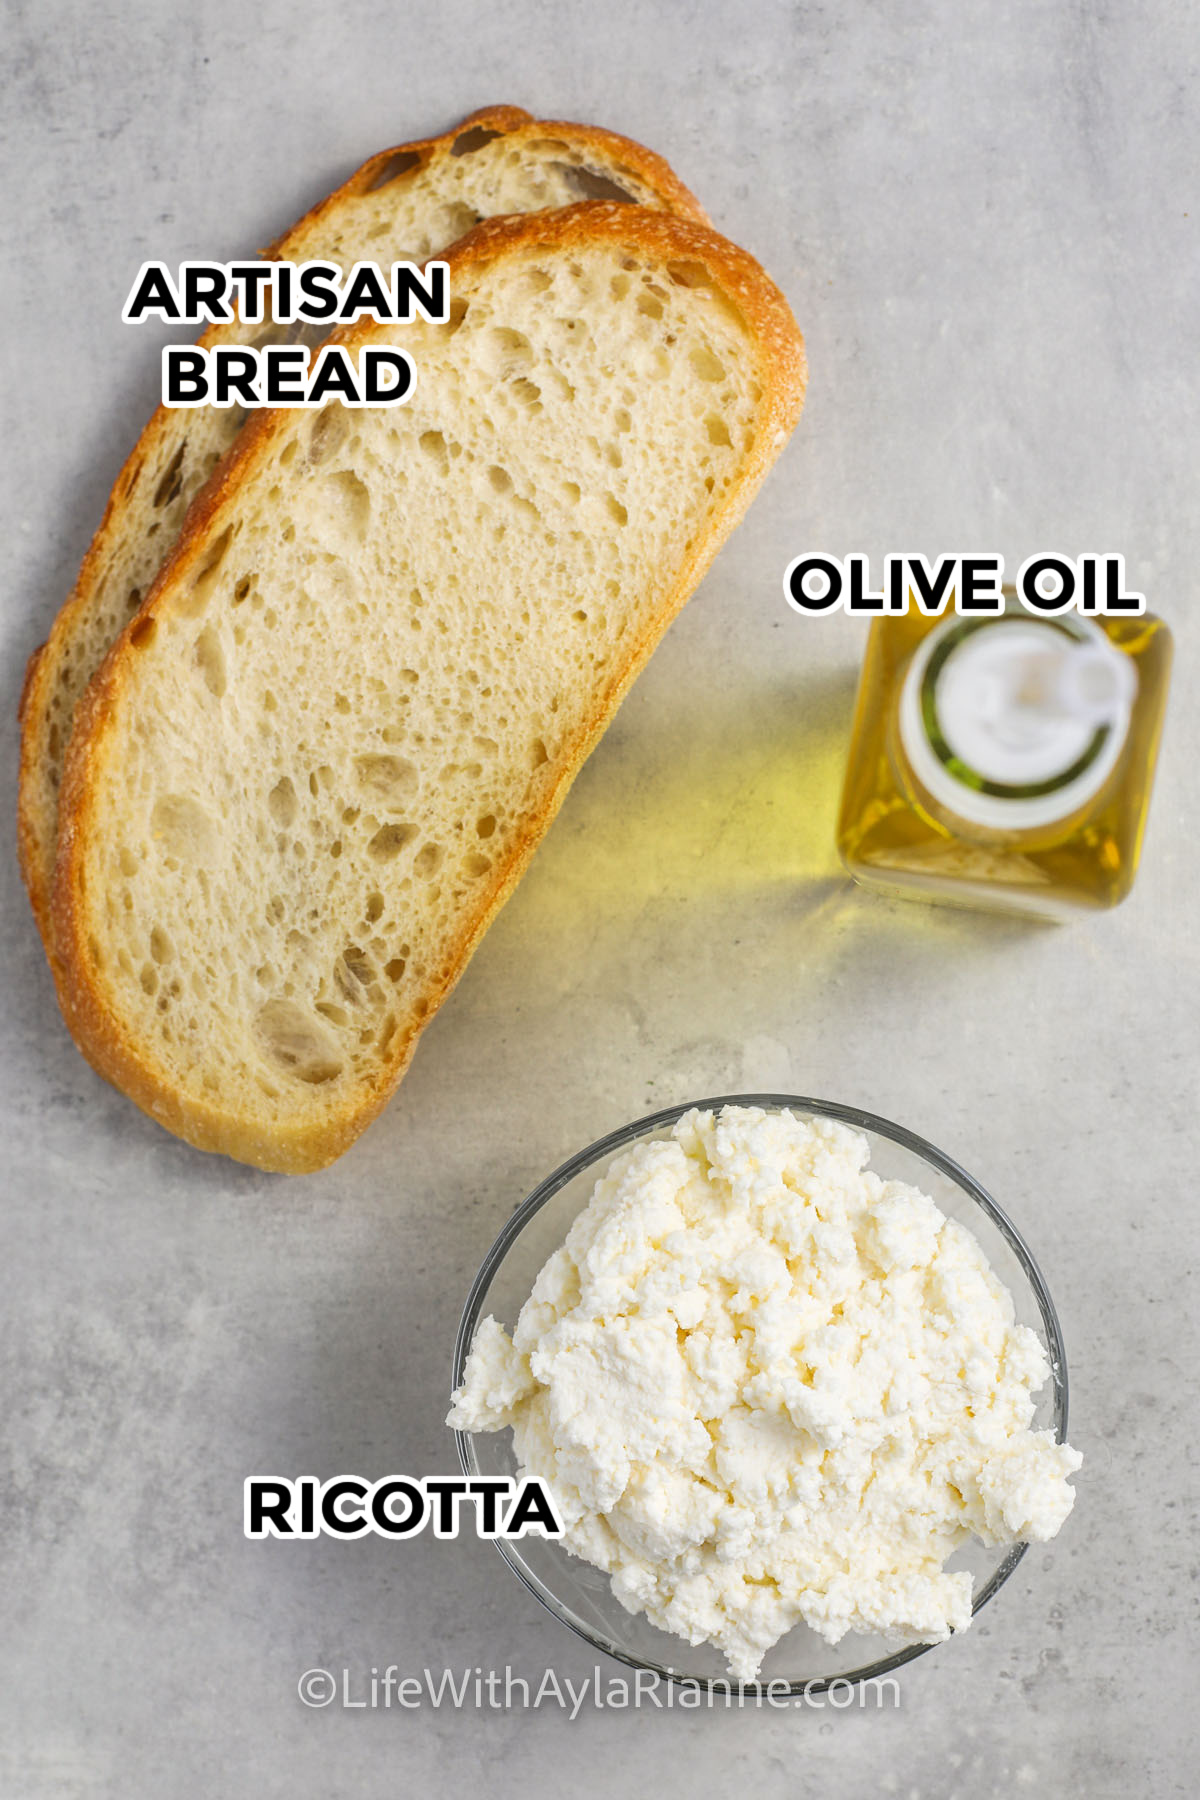 Ricotta Toast ingredients including artisan bread, ricotta, and olive oil